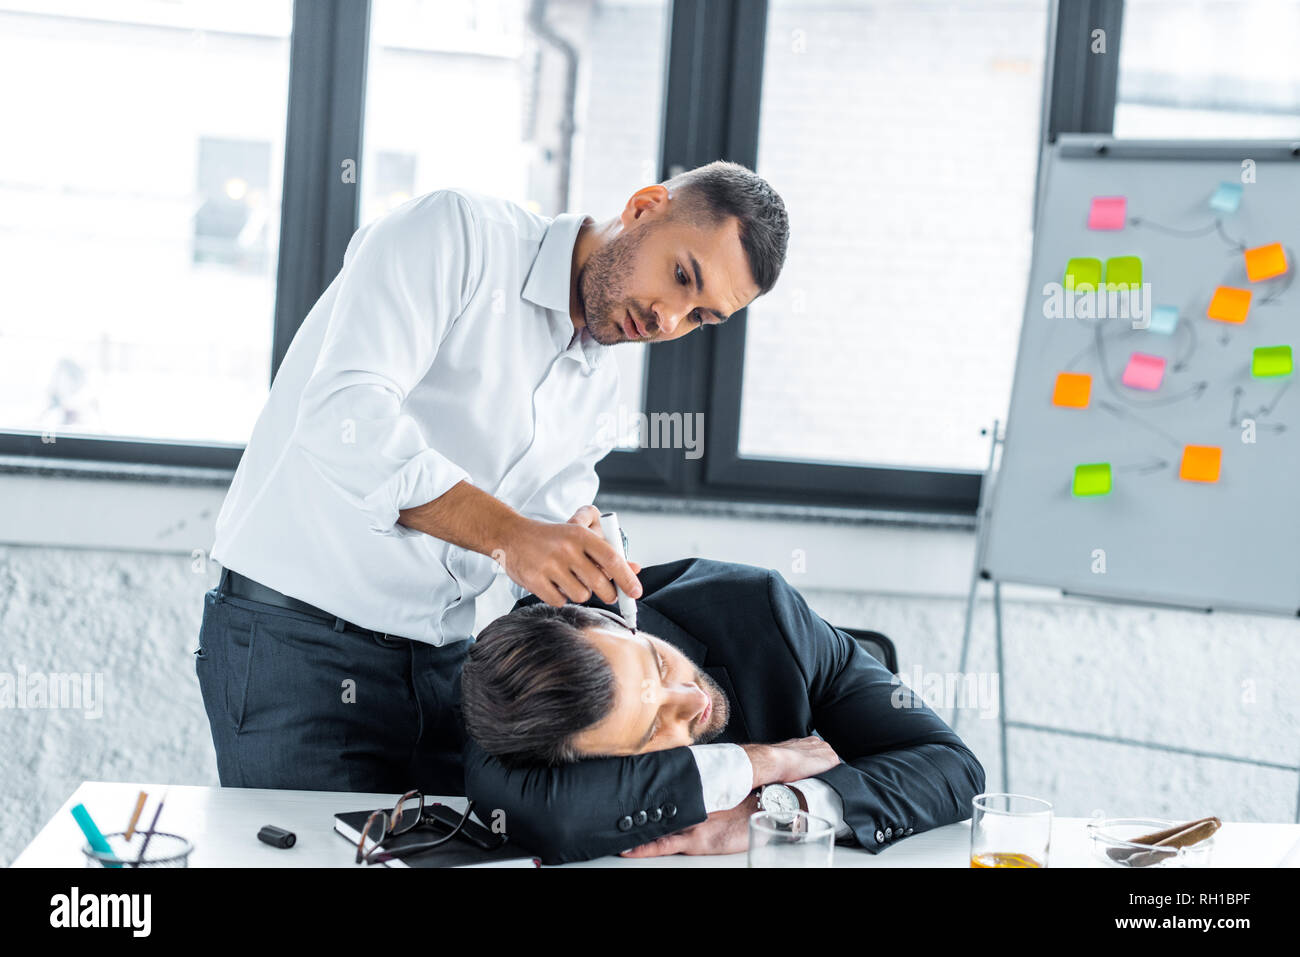 focused man drawing with marker on face of sleeping coworker in modern office Stock Photo